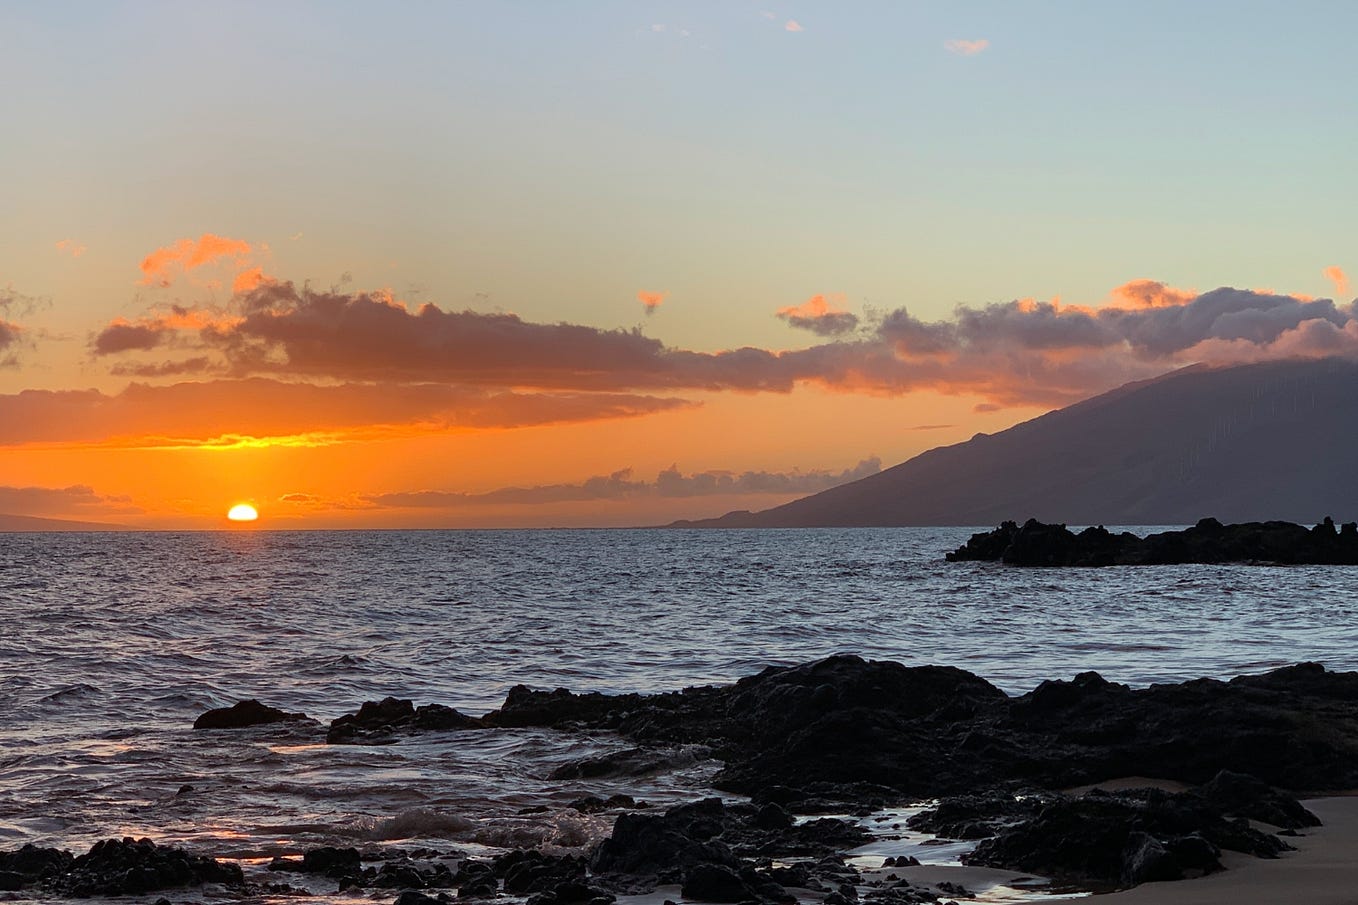 West Maui rises in the distance in a sunset photo taken from Kamaole Beach Park III.